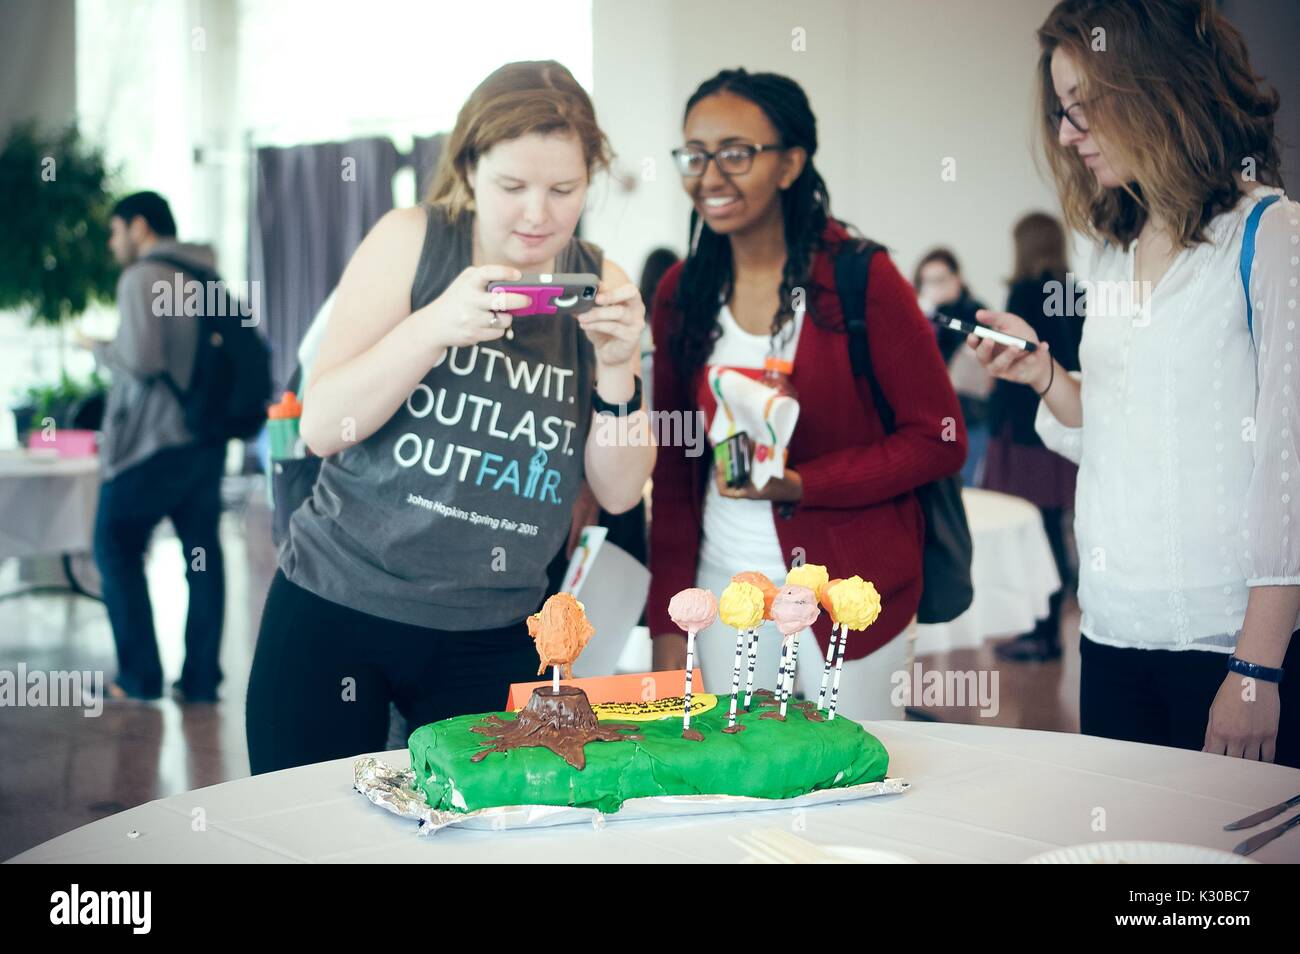 Undergraduate students taking pictures of a cake decorated for 'The Lorax' at the Edible Book Festival at Johns Hopkins University, Baltimore, Maryland, March 31, 2016. Courtesy Eric Chen. Stock Photo